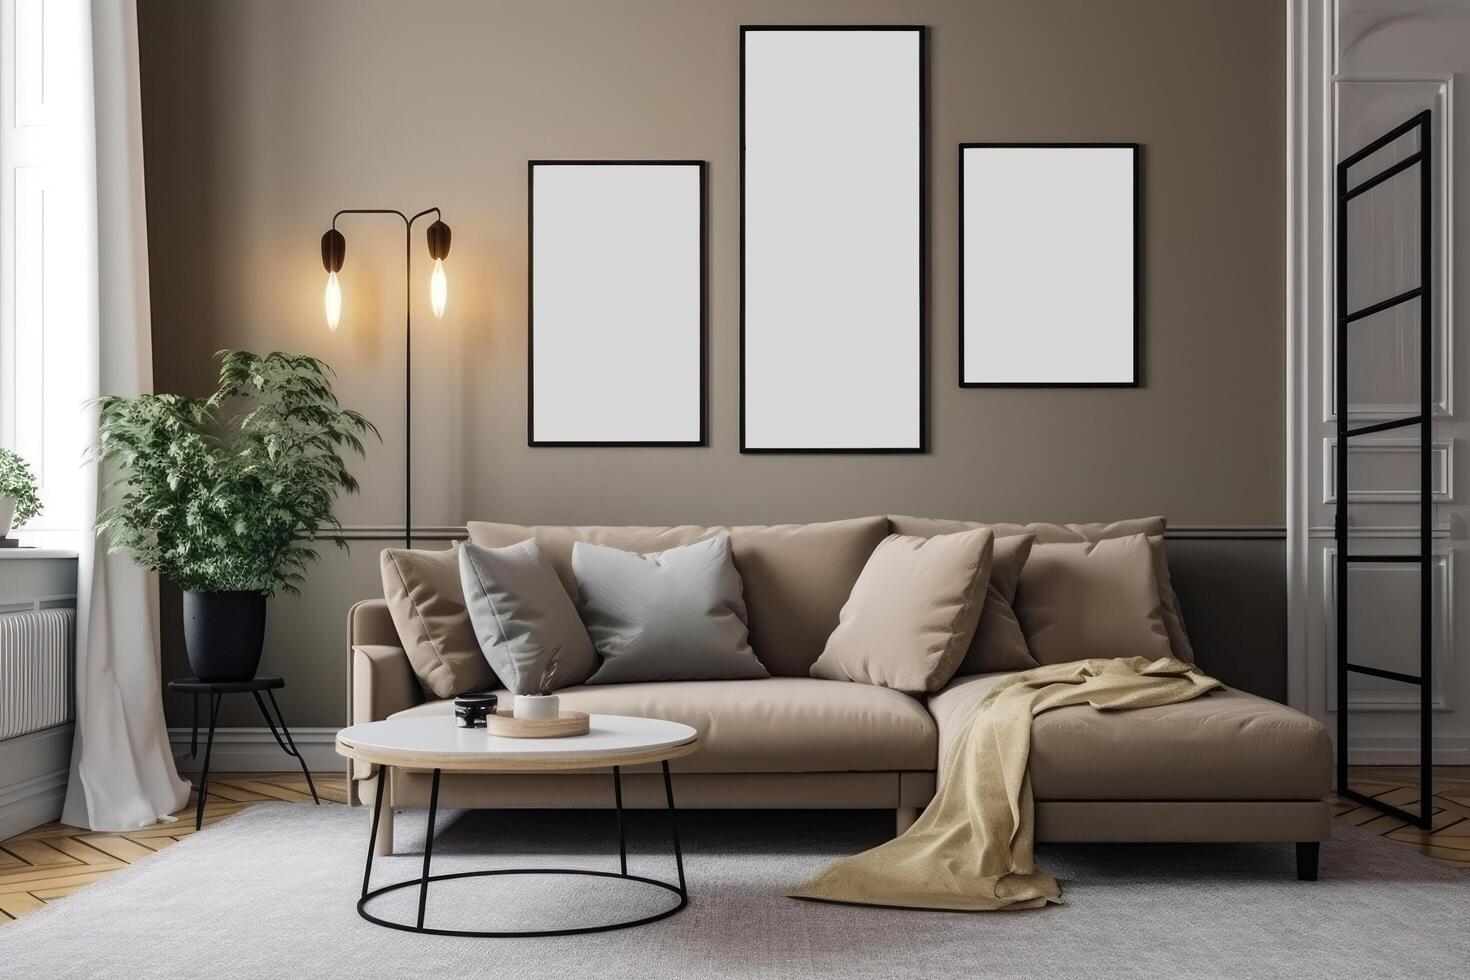 Mock up poster frame in modern interior background, 3d render, Mockup poster frame on the wall in a living room, photo